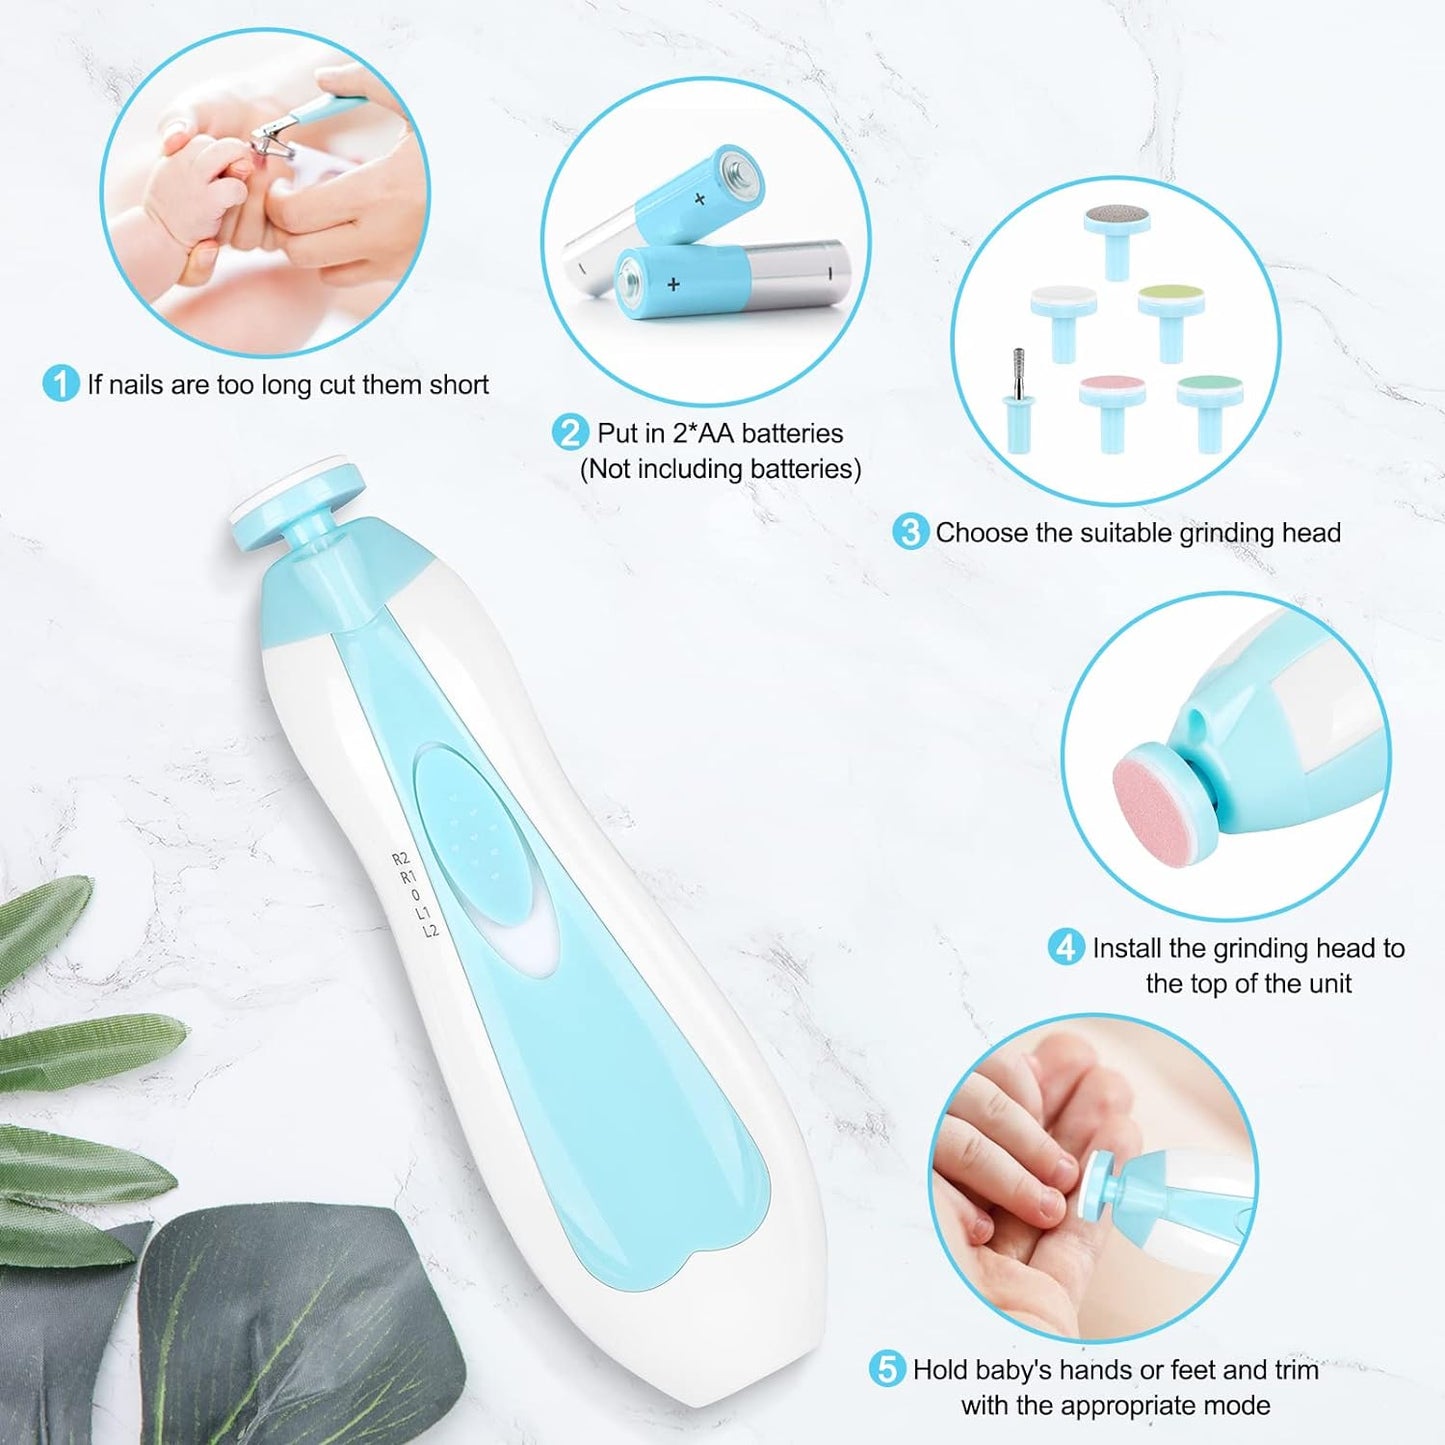 Baby Nail Trimmer Electric,Baby Nail Clippers, 6 in 1 Baby Nail File,Nail File Baby Grooming Kit Manicure Set for Toddler or Adults